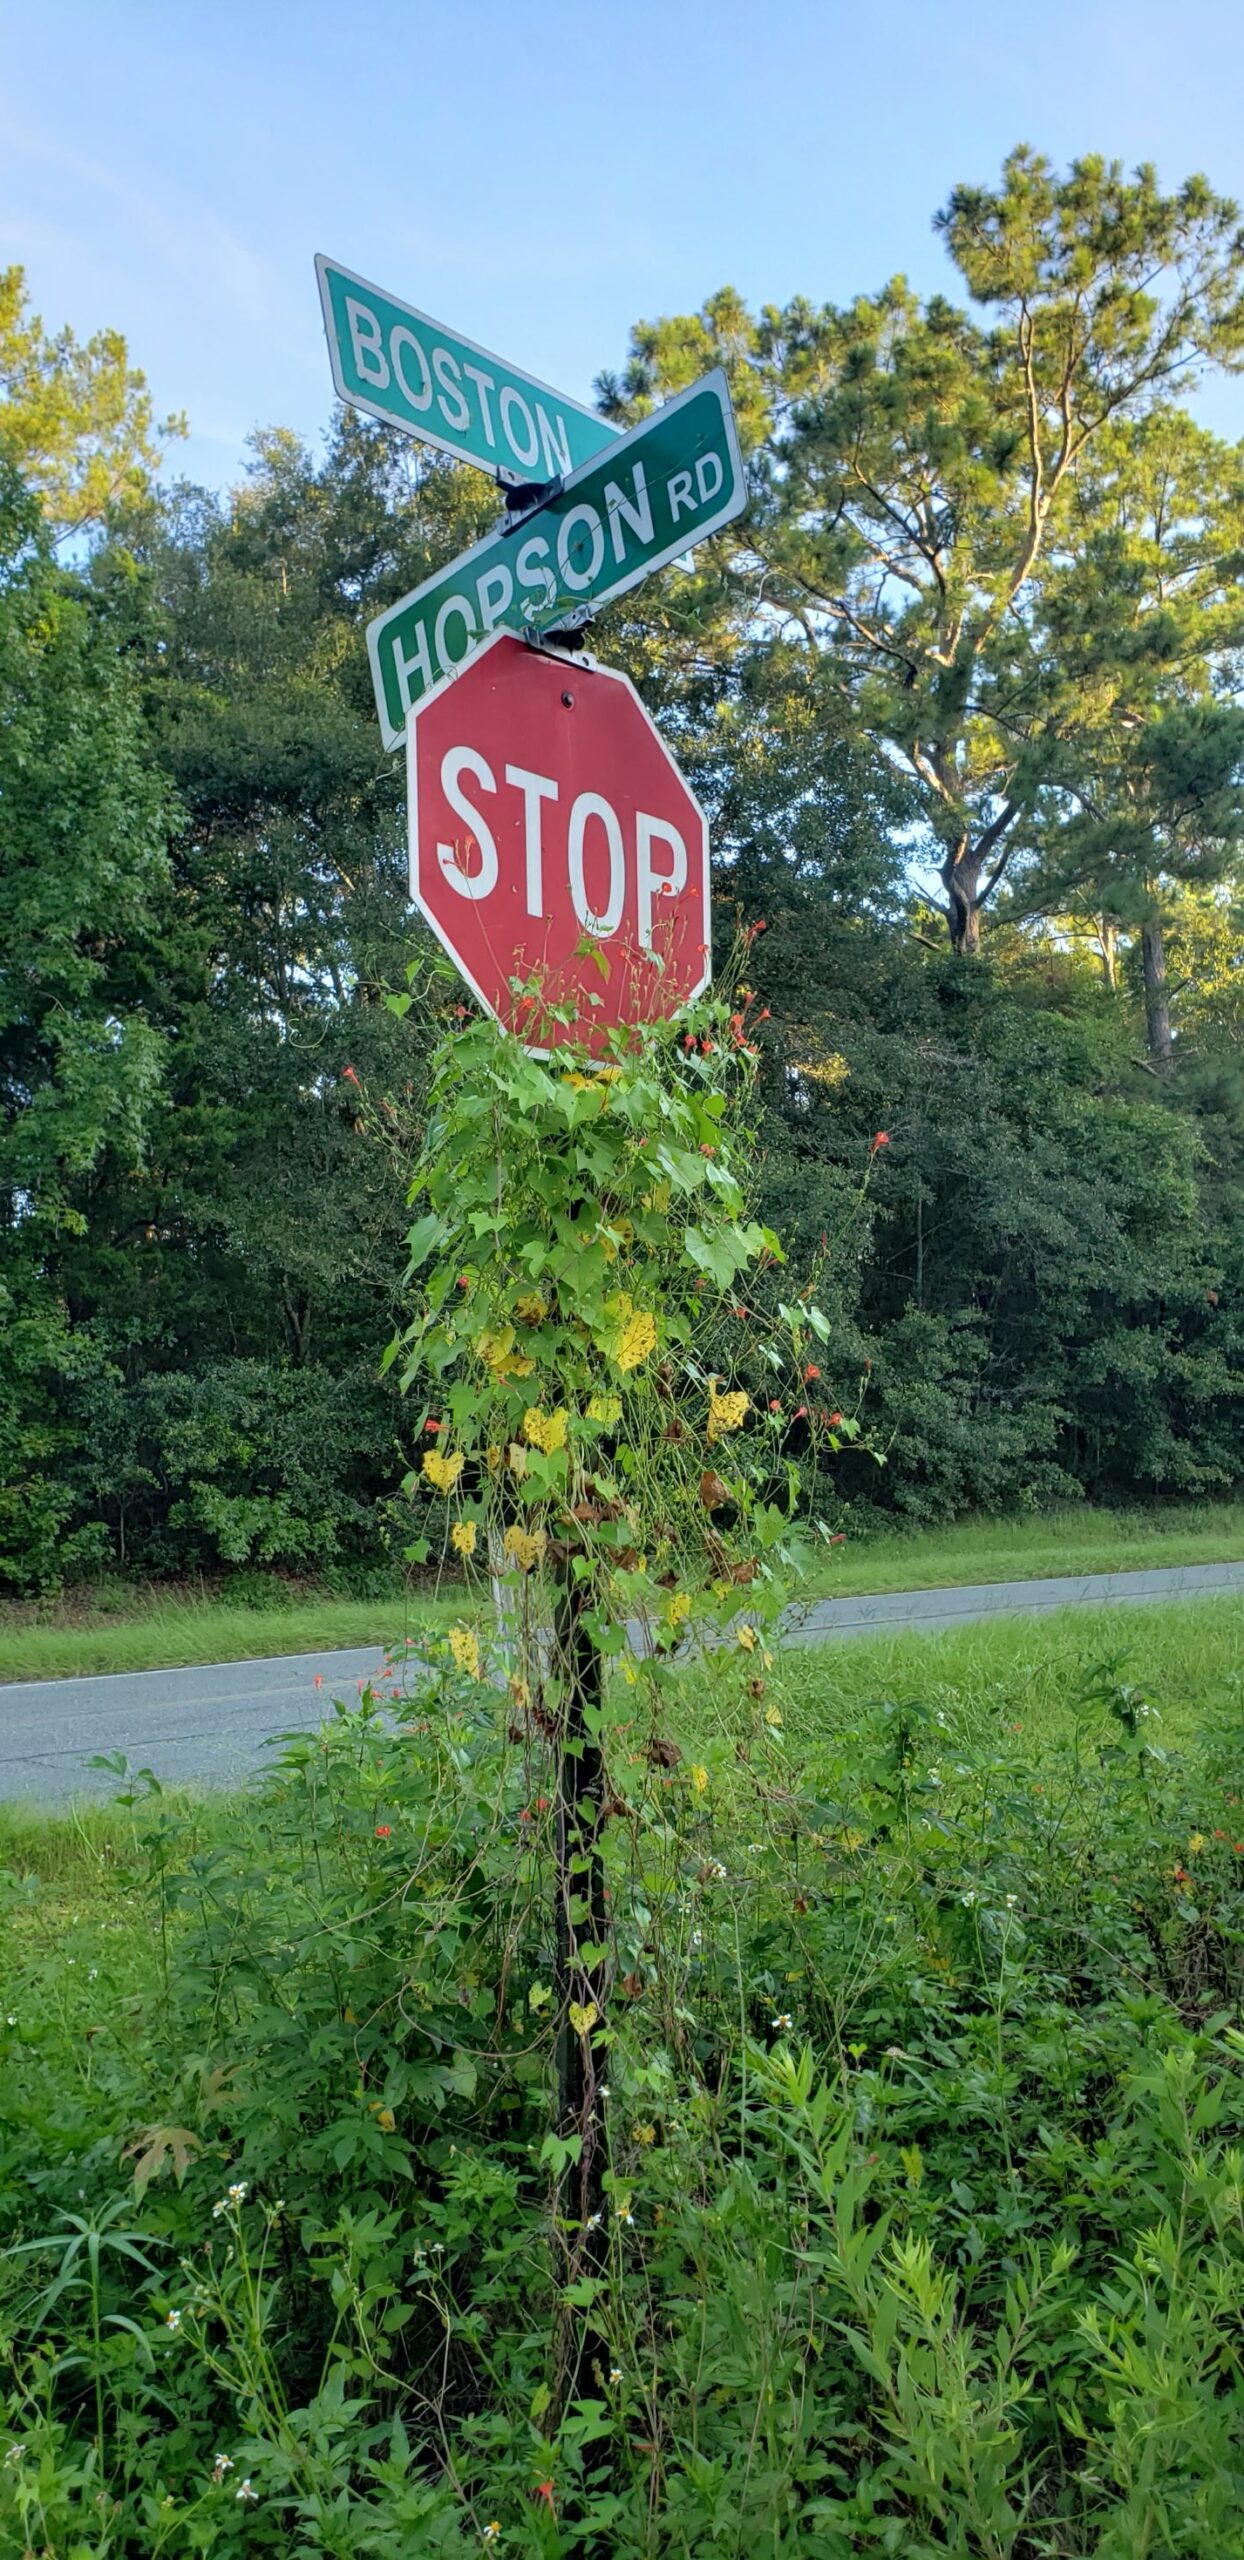 Photo is decorative. The image shows a stop sign covered in vines.